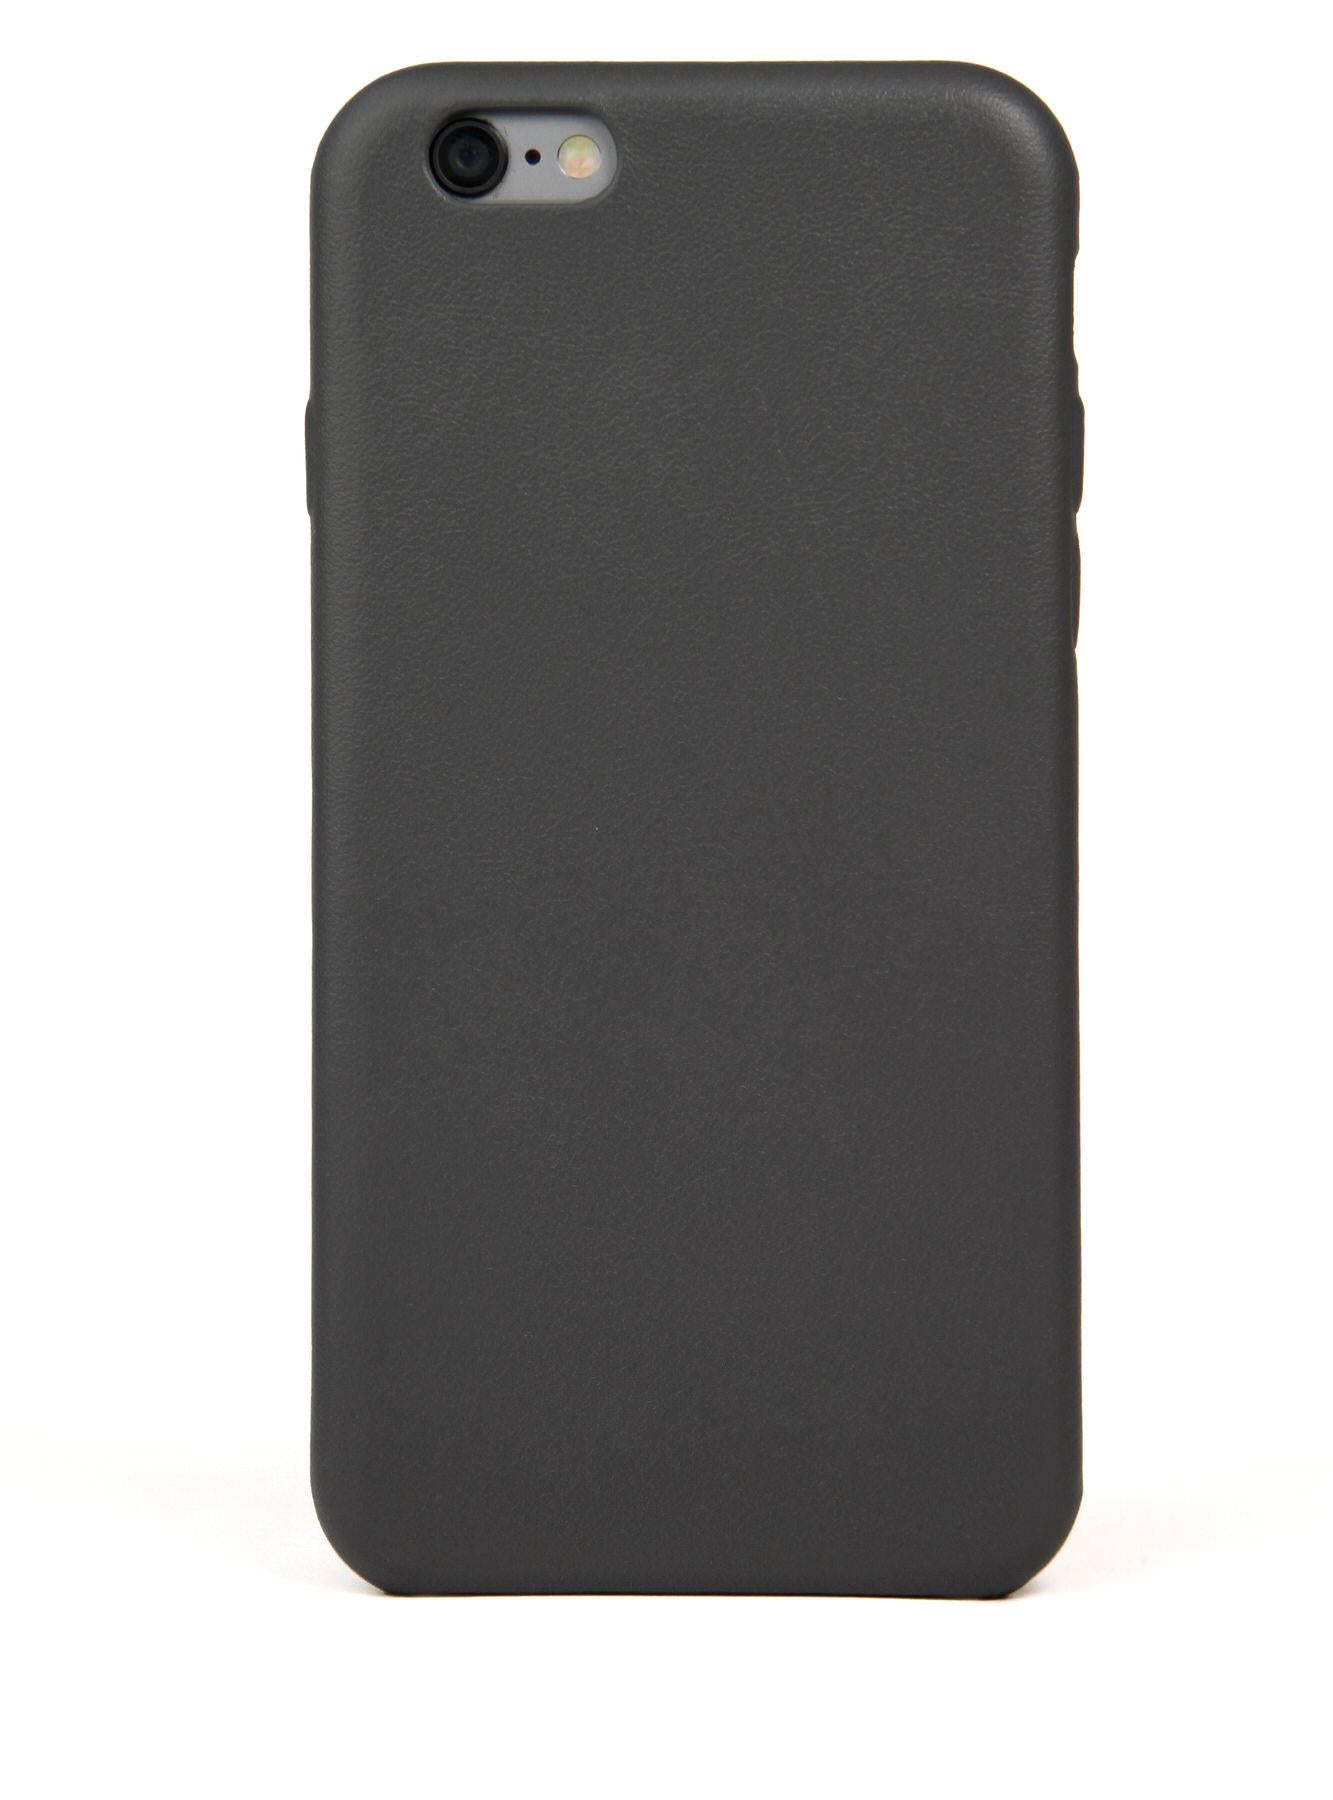 iPhone 6 Case, Grey Leather